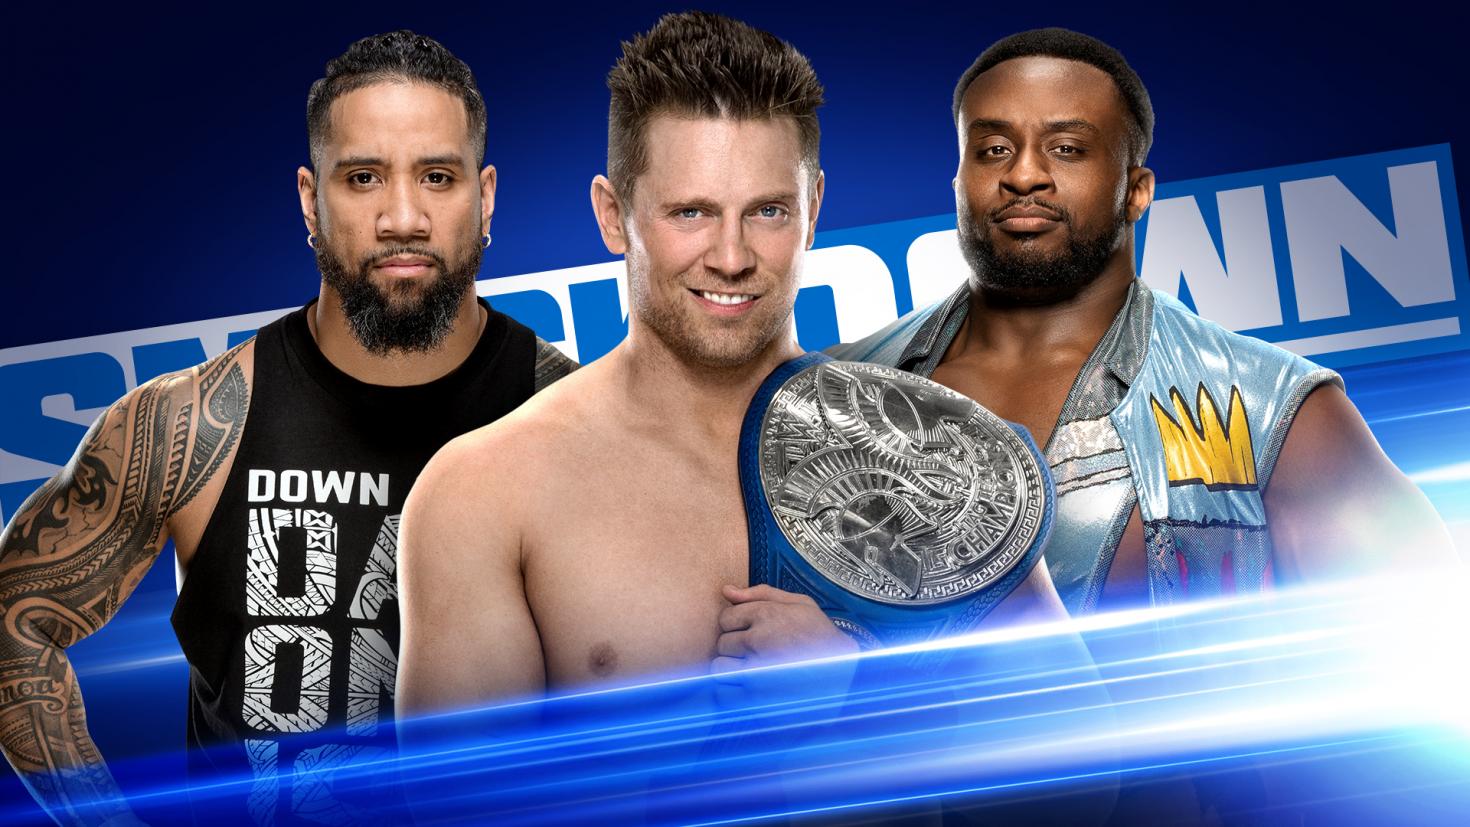 WWE Smackdown Preview and Predictions